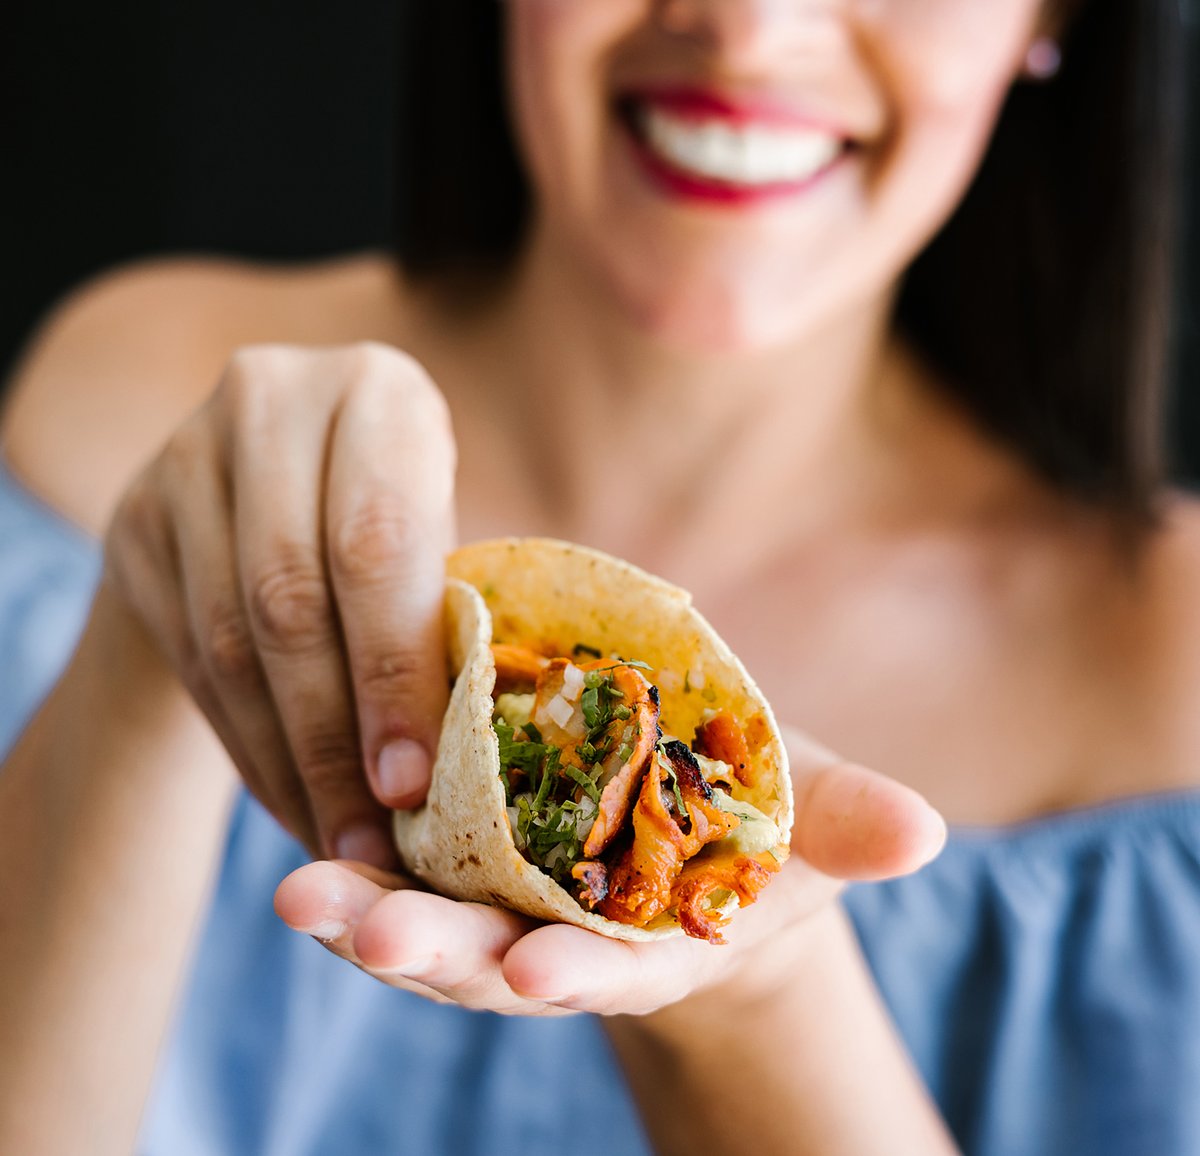 'Fiesta De Mayo' Tour, May 5: Calling all foodies and fiesta enthusiasts! Ditch the ordinary and join The Tasting Tours on an adventure you won't forget.  #FloridasHistoricCoast #StAugustine #TheTastingTours bit.ly/3UbHRBC